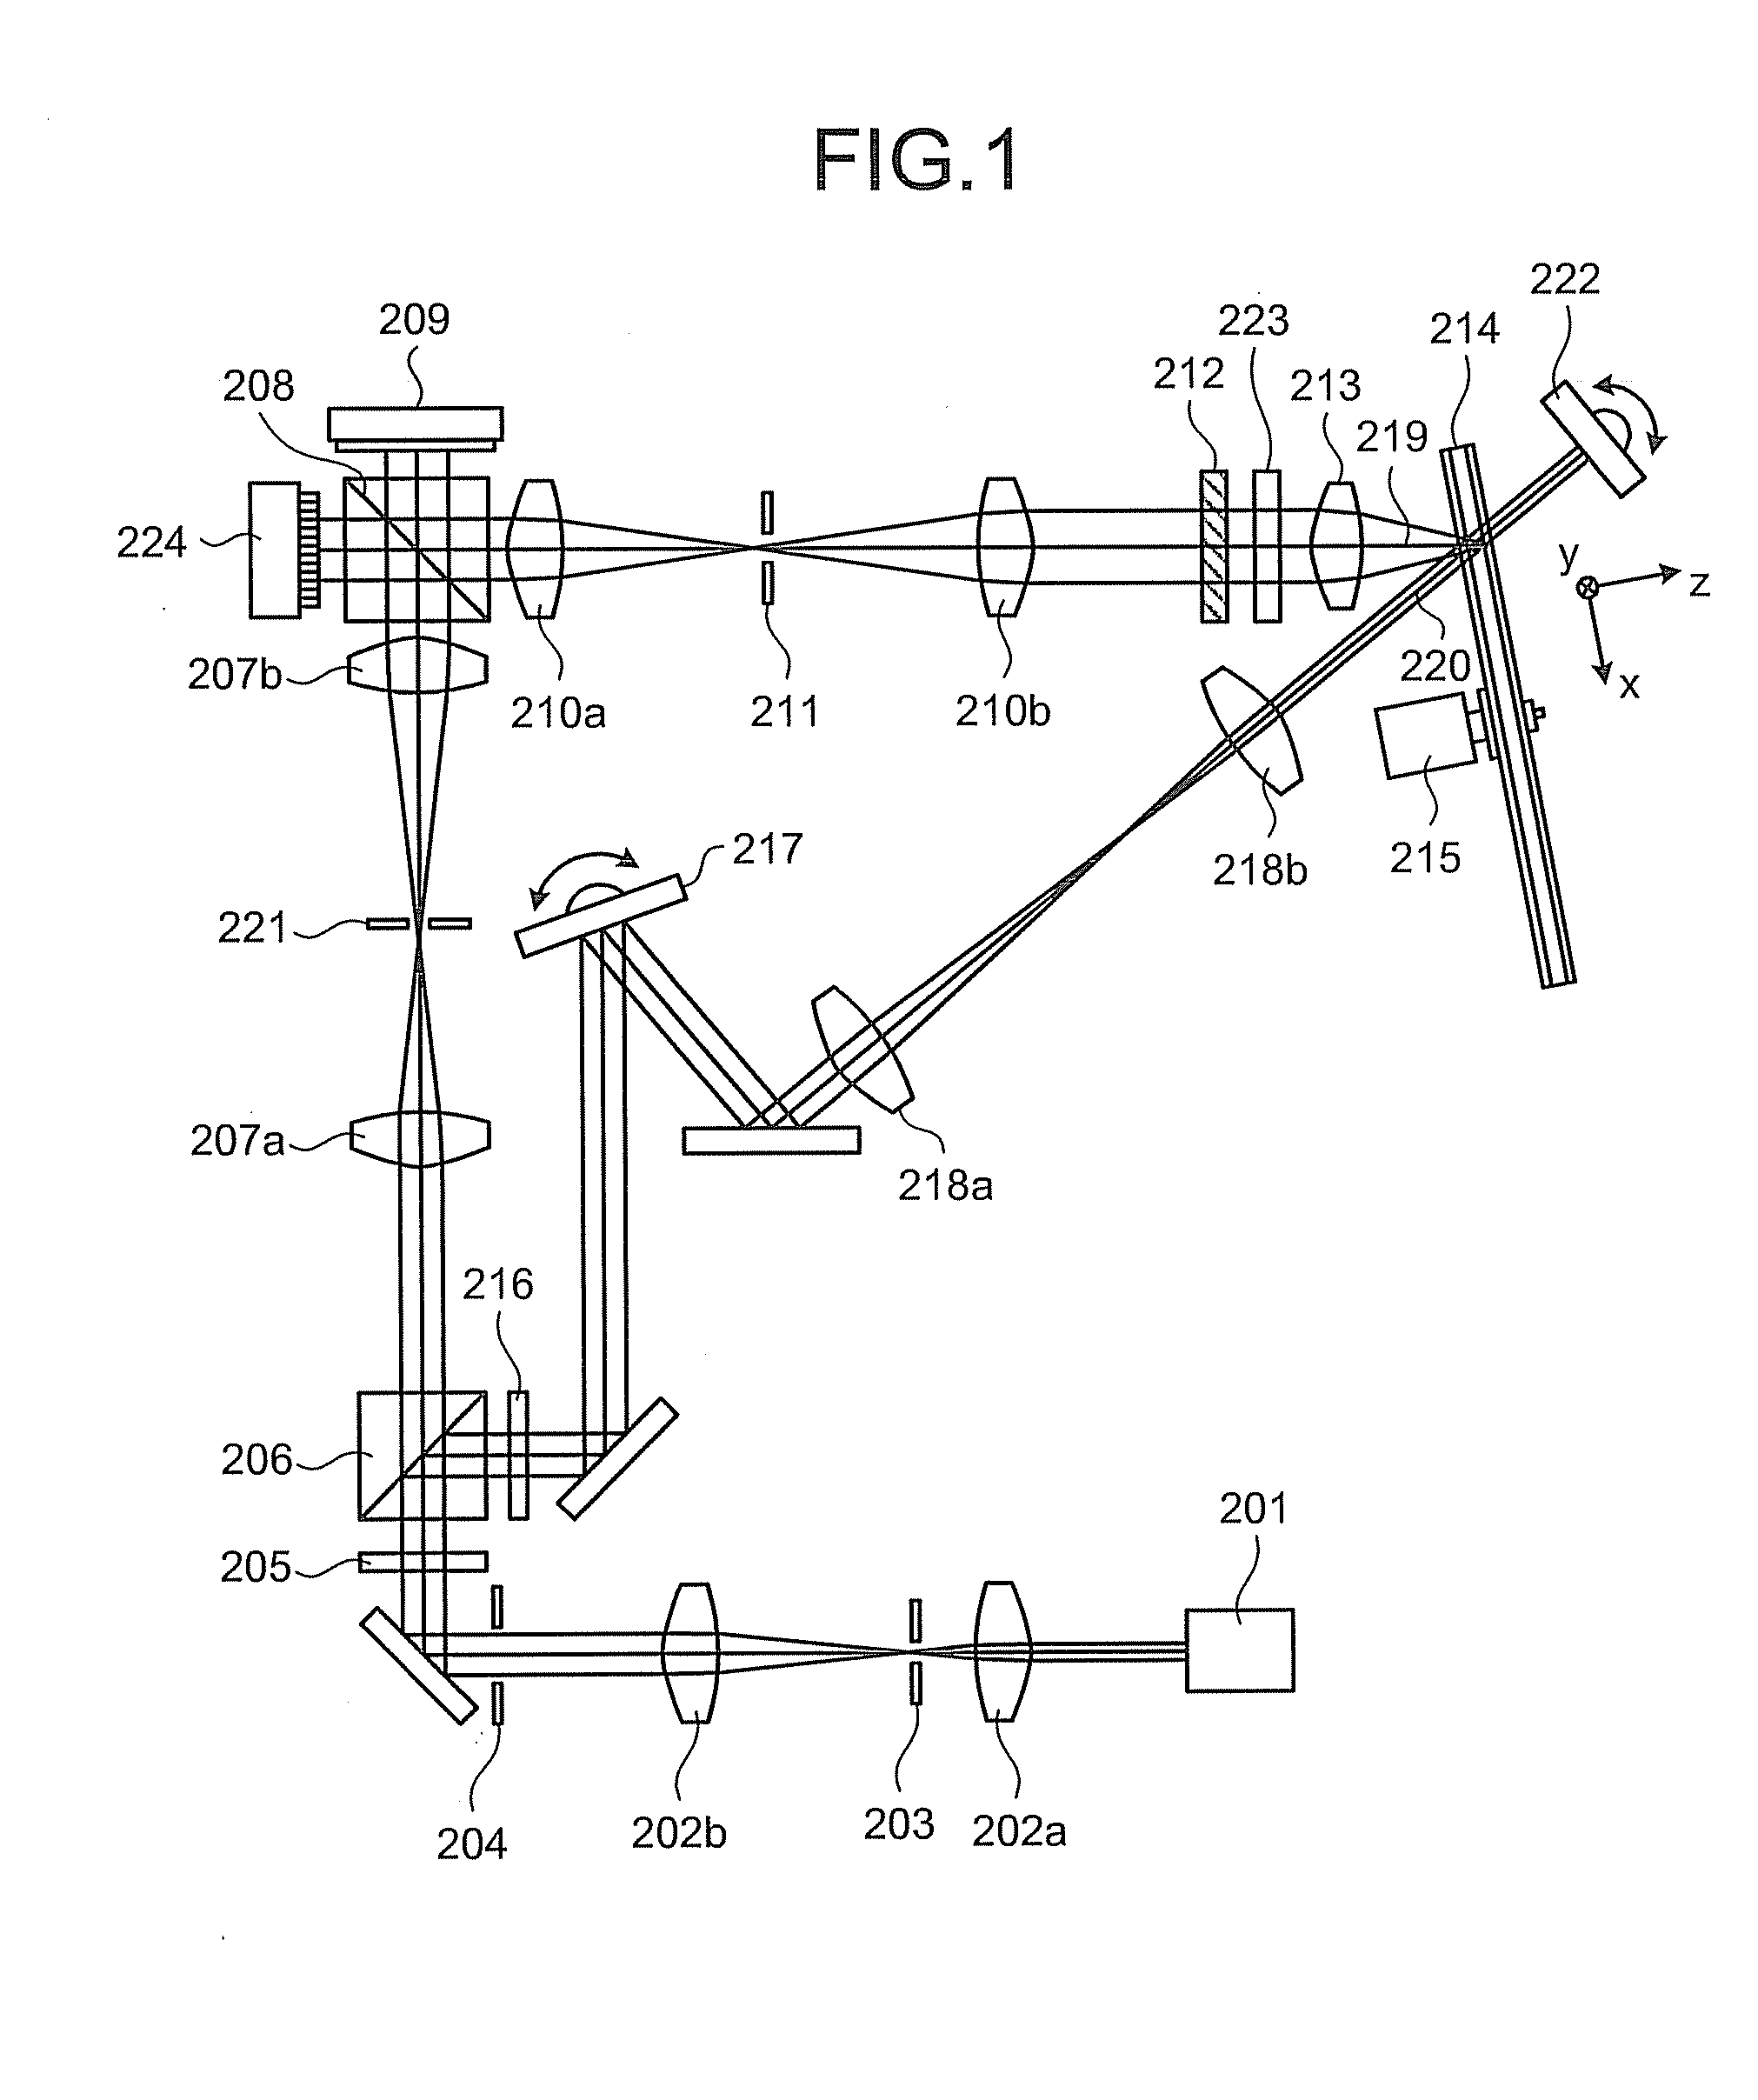 Optical information recording apparatus and method